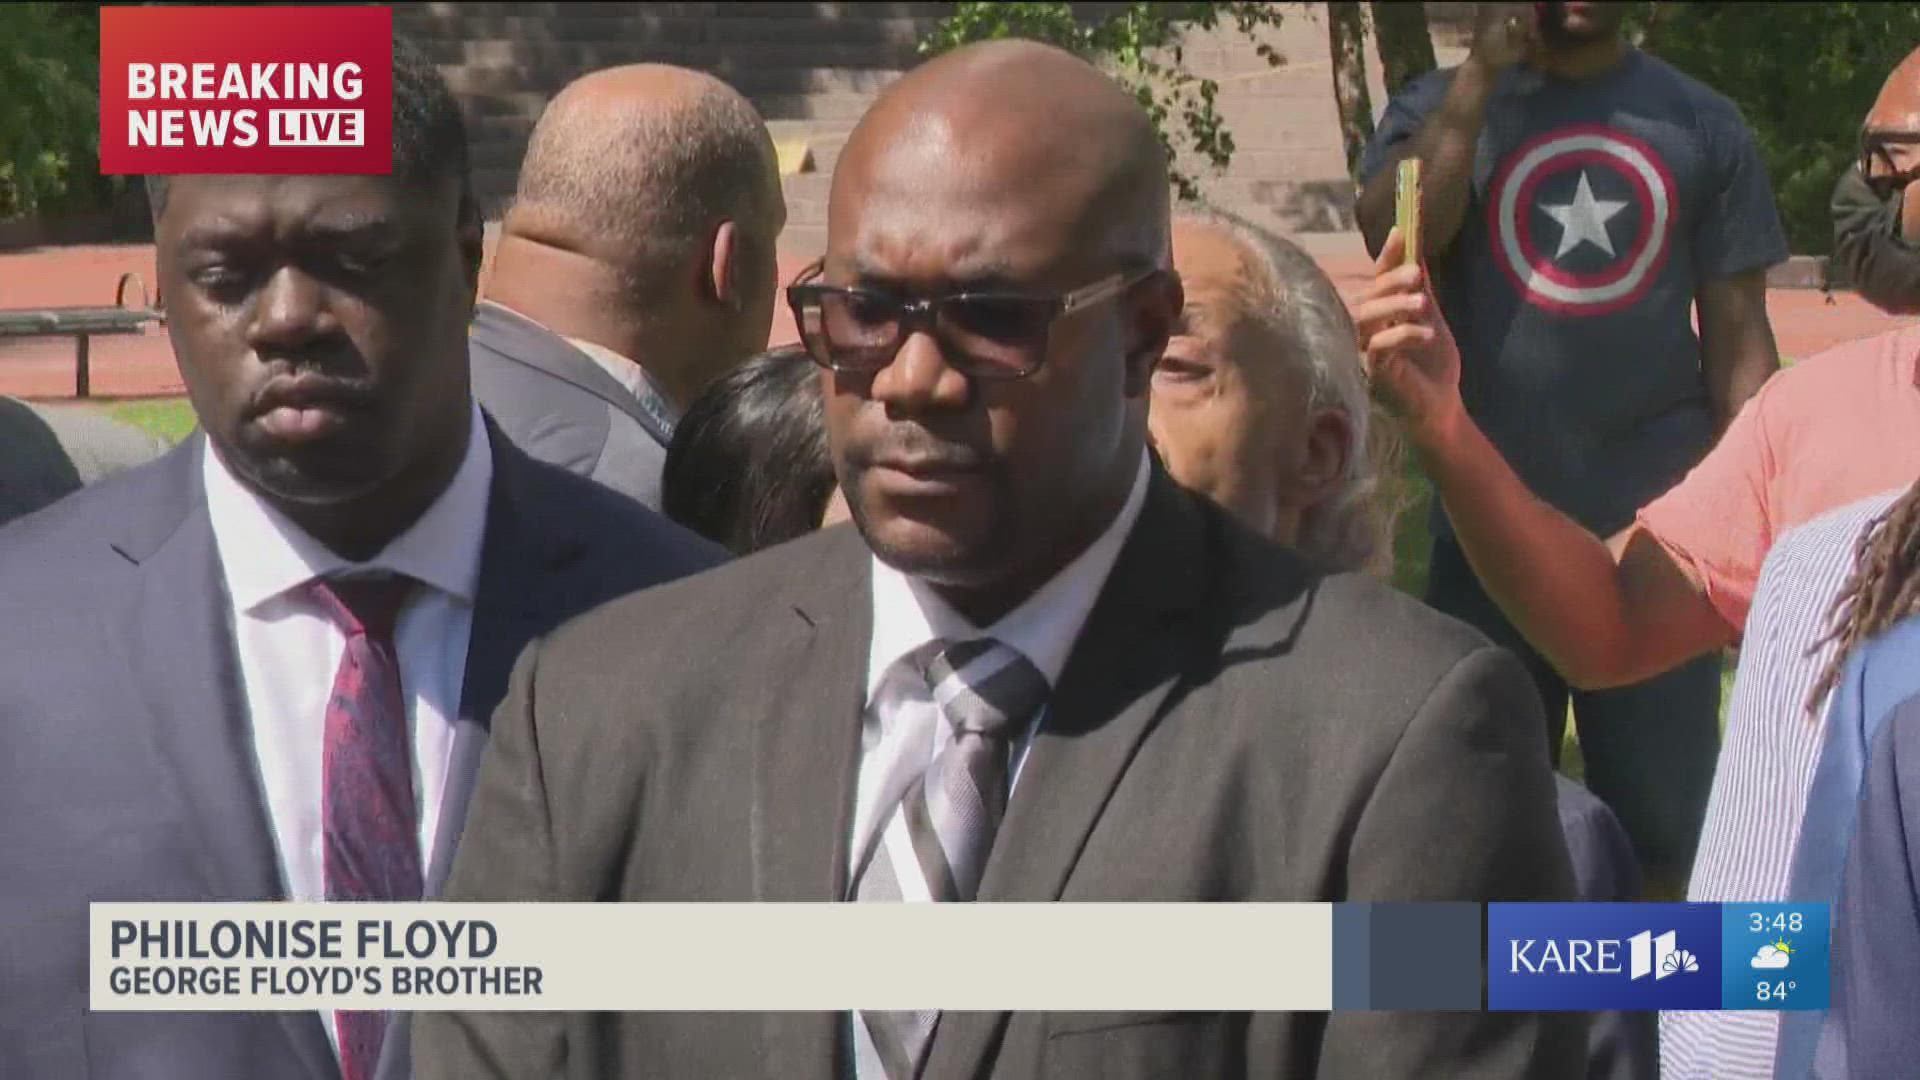 George Floyd's family, their attorney Ben Crump and civil rights leader Rev. Al Sharpton held a news conference outside the Hennepin County Courthouse.